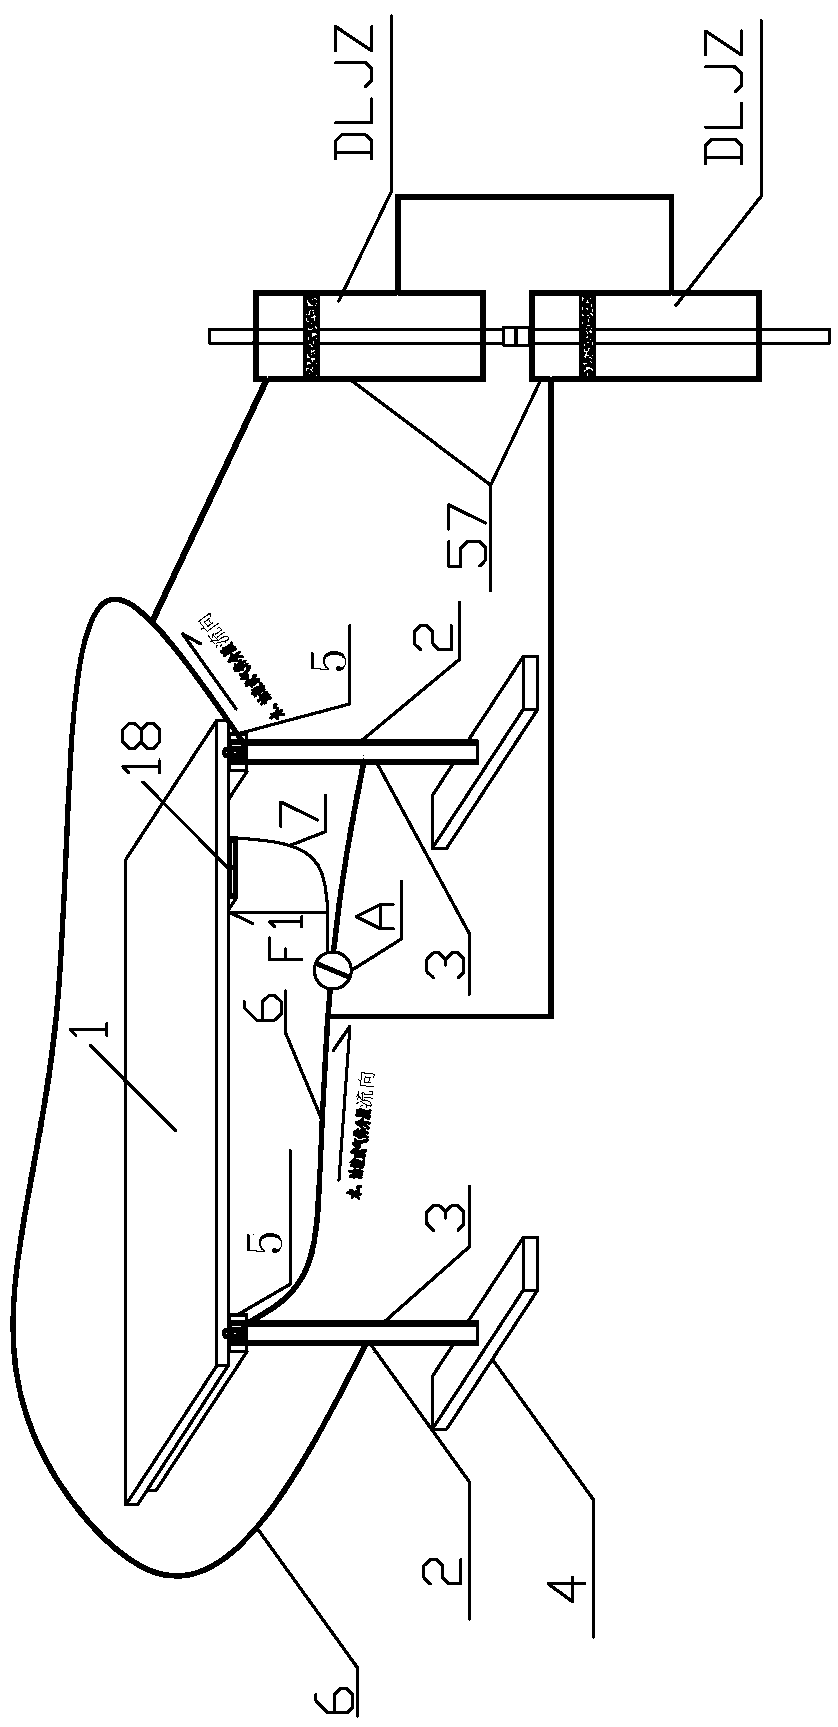 External air reservoir or tank linkage synchronous lifting table based on principle of gas spring